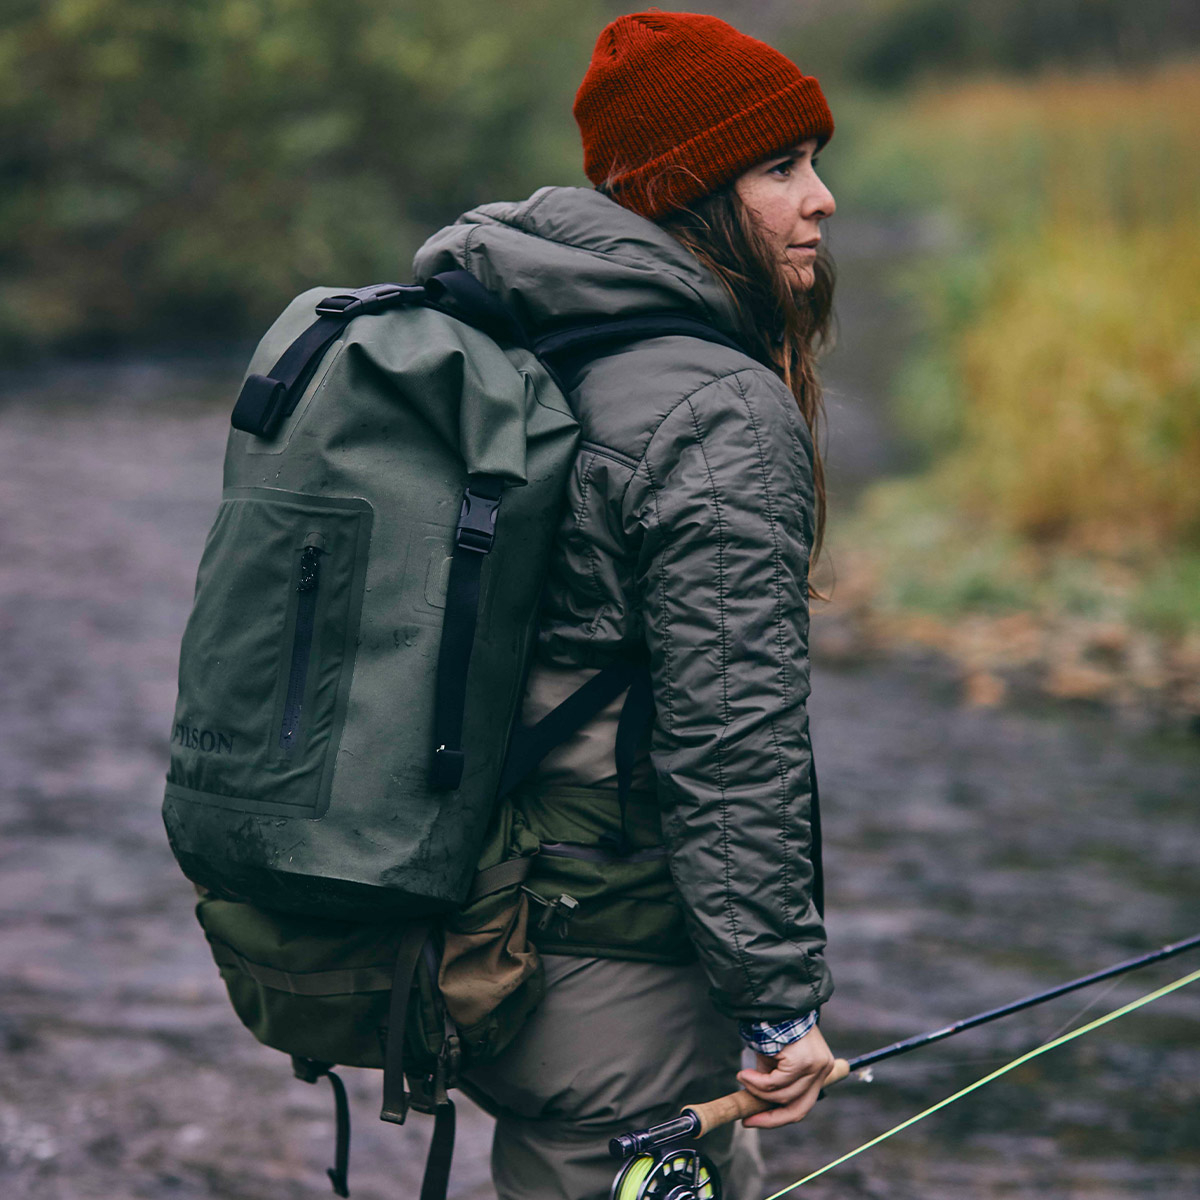 Filson Dry Backpack, for use in all weather conditions